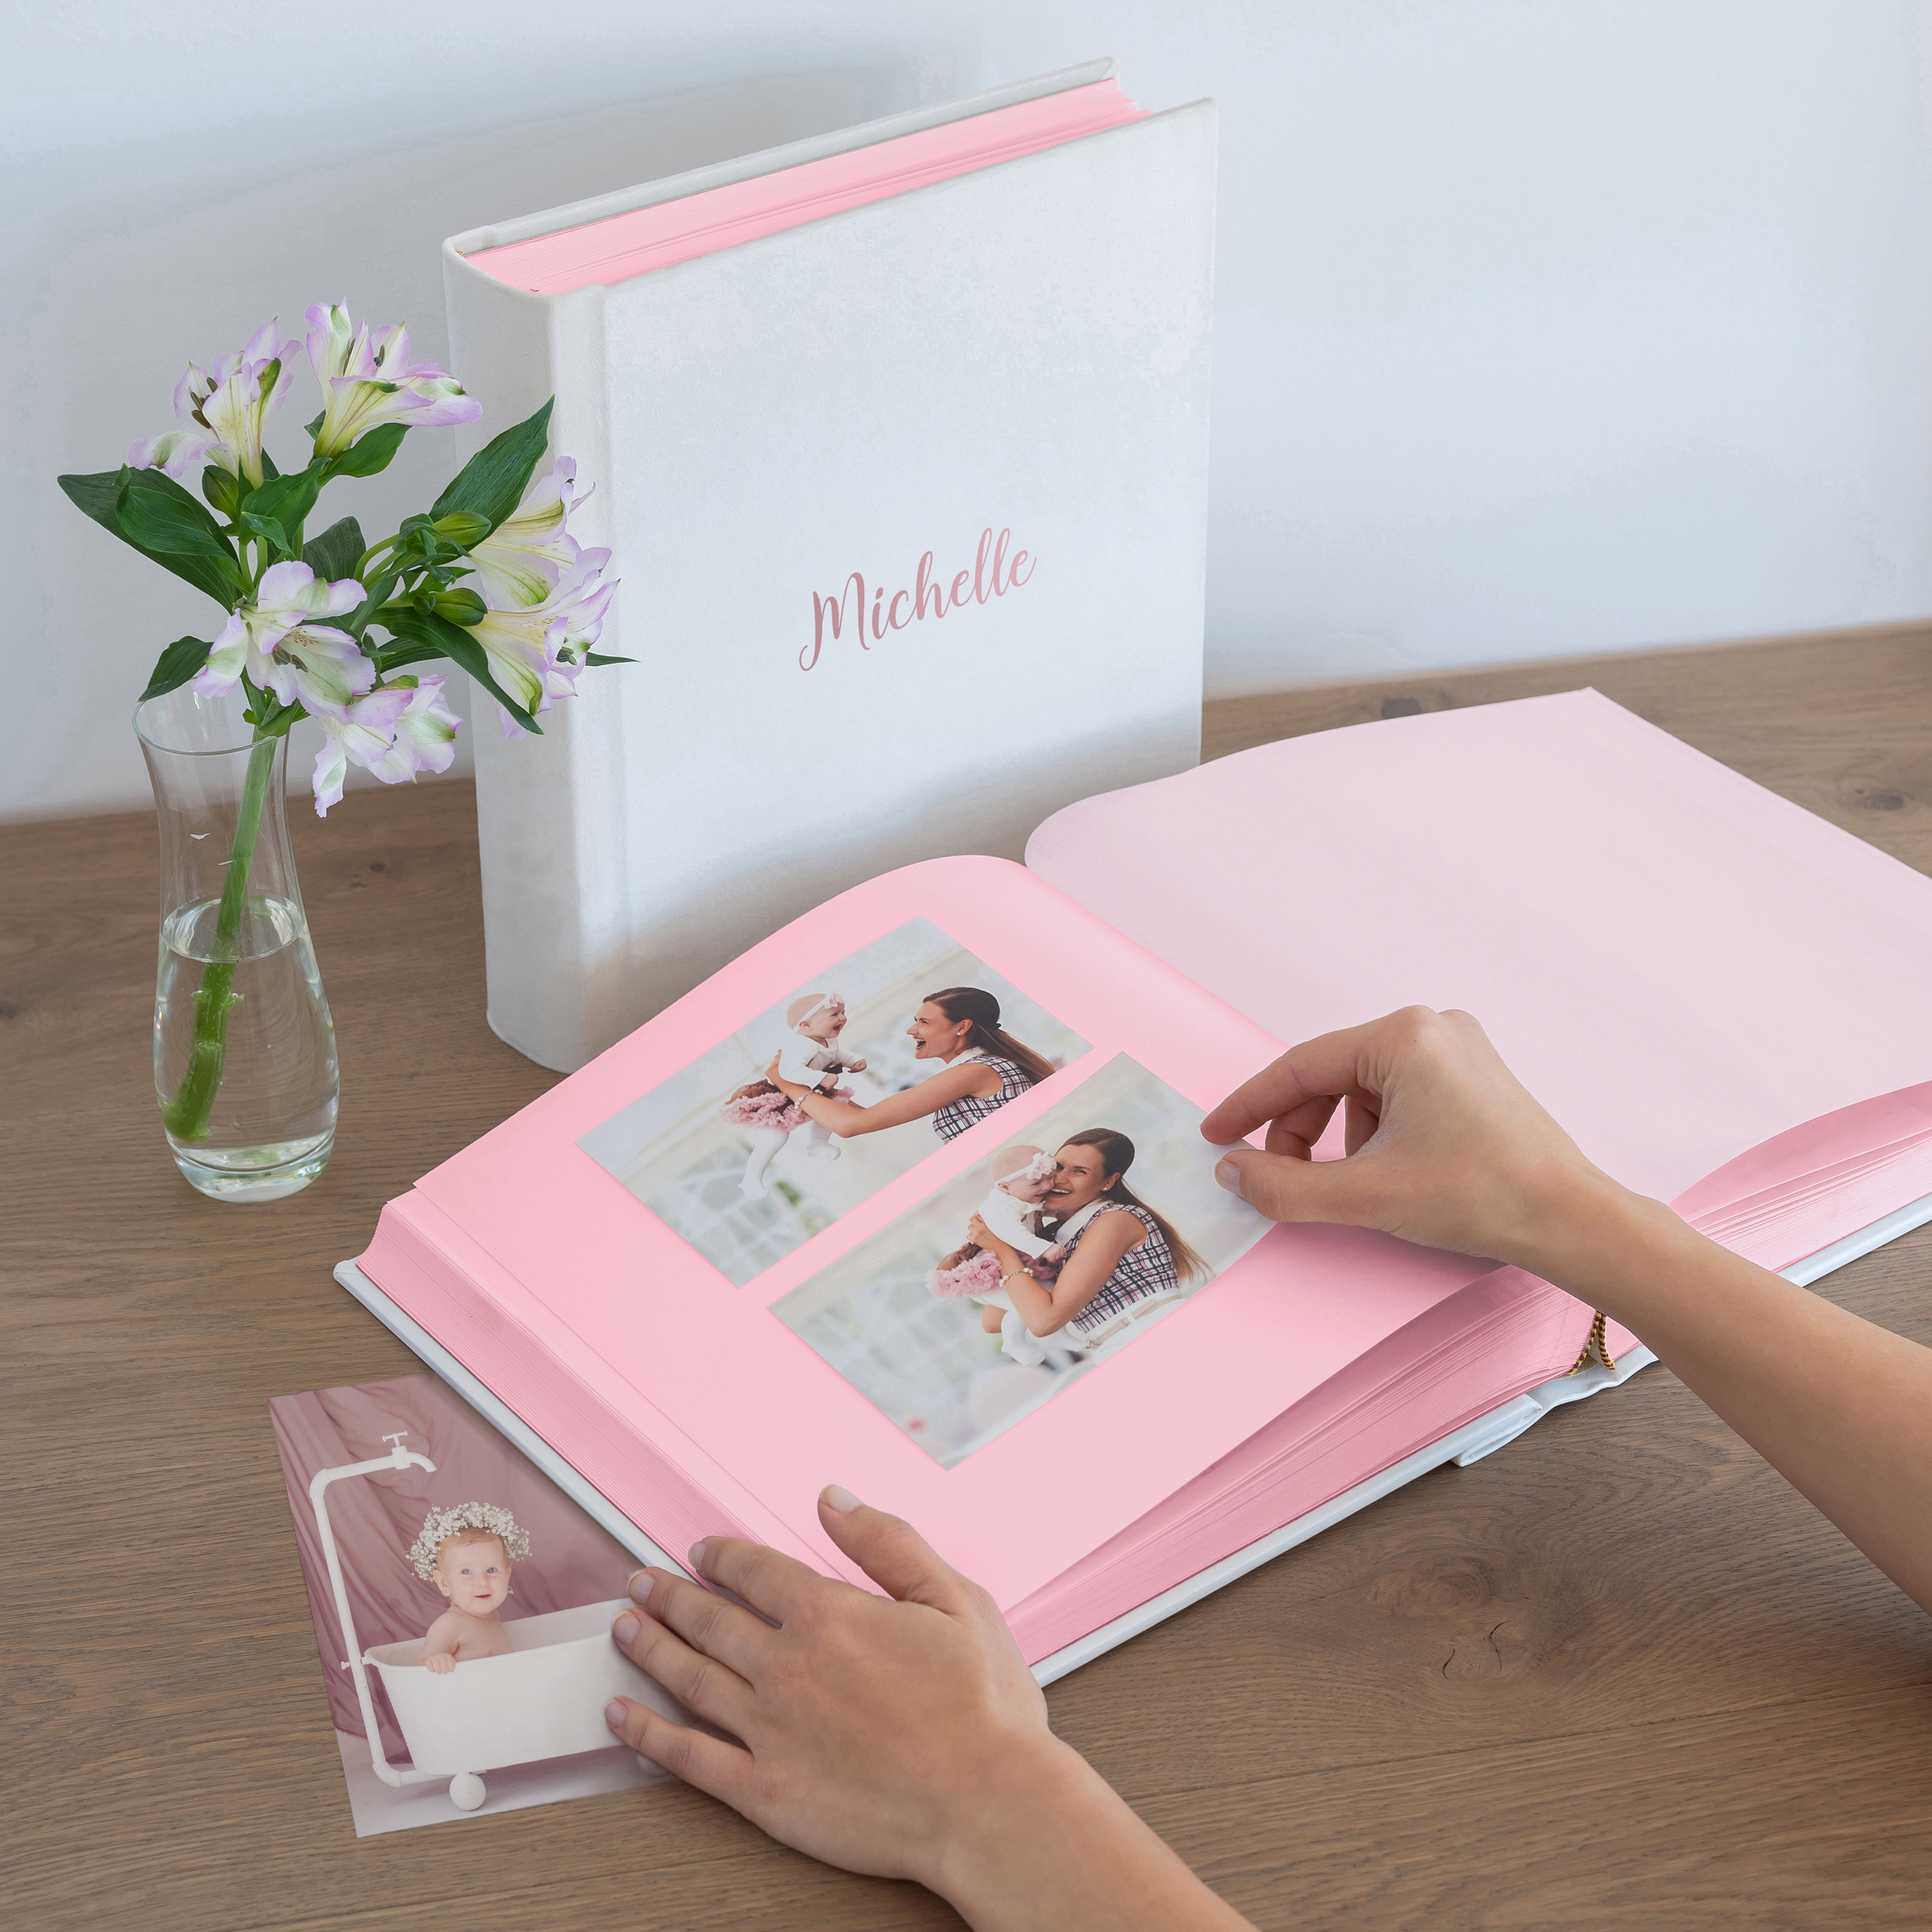  C.R. Gibson Pink Photo Album Baby Book for Girls, 10.4 x 9.7 x  1.9 inches, 80 Pages : Baby Photo Albums : Baby